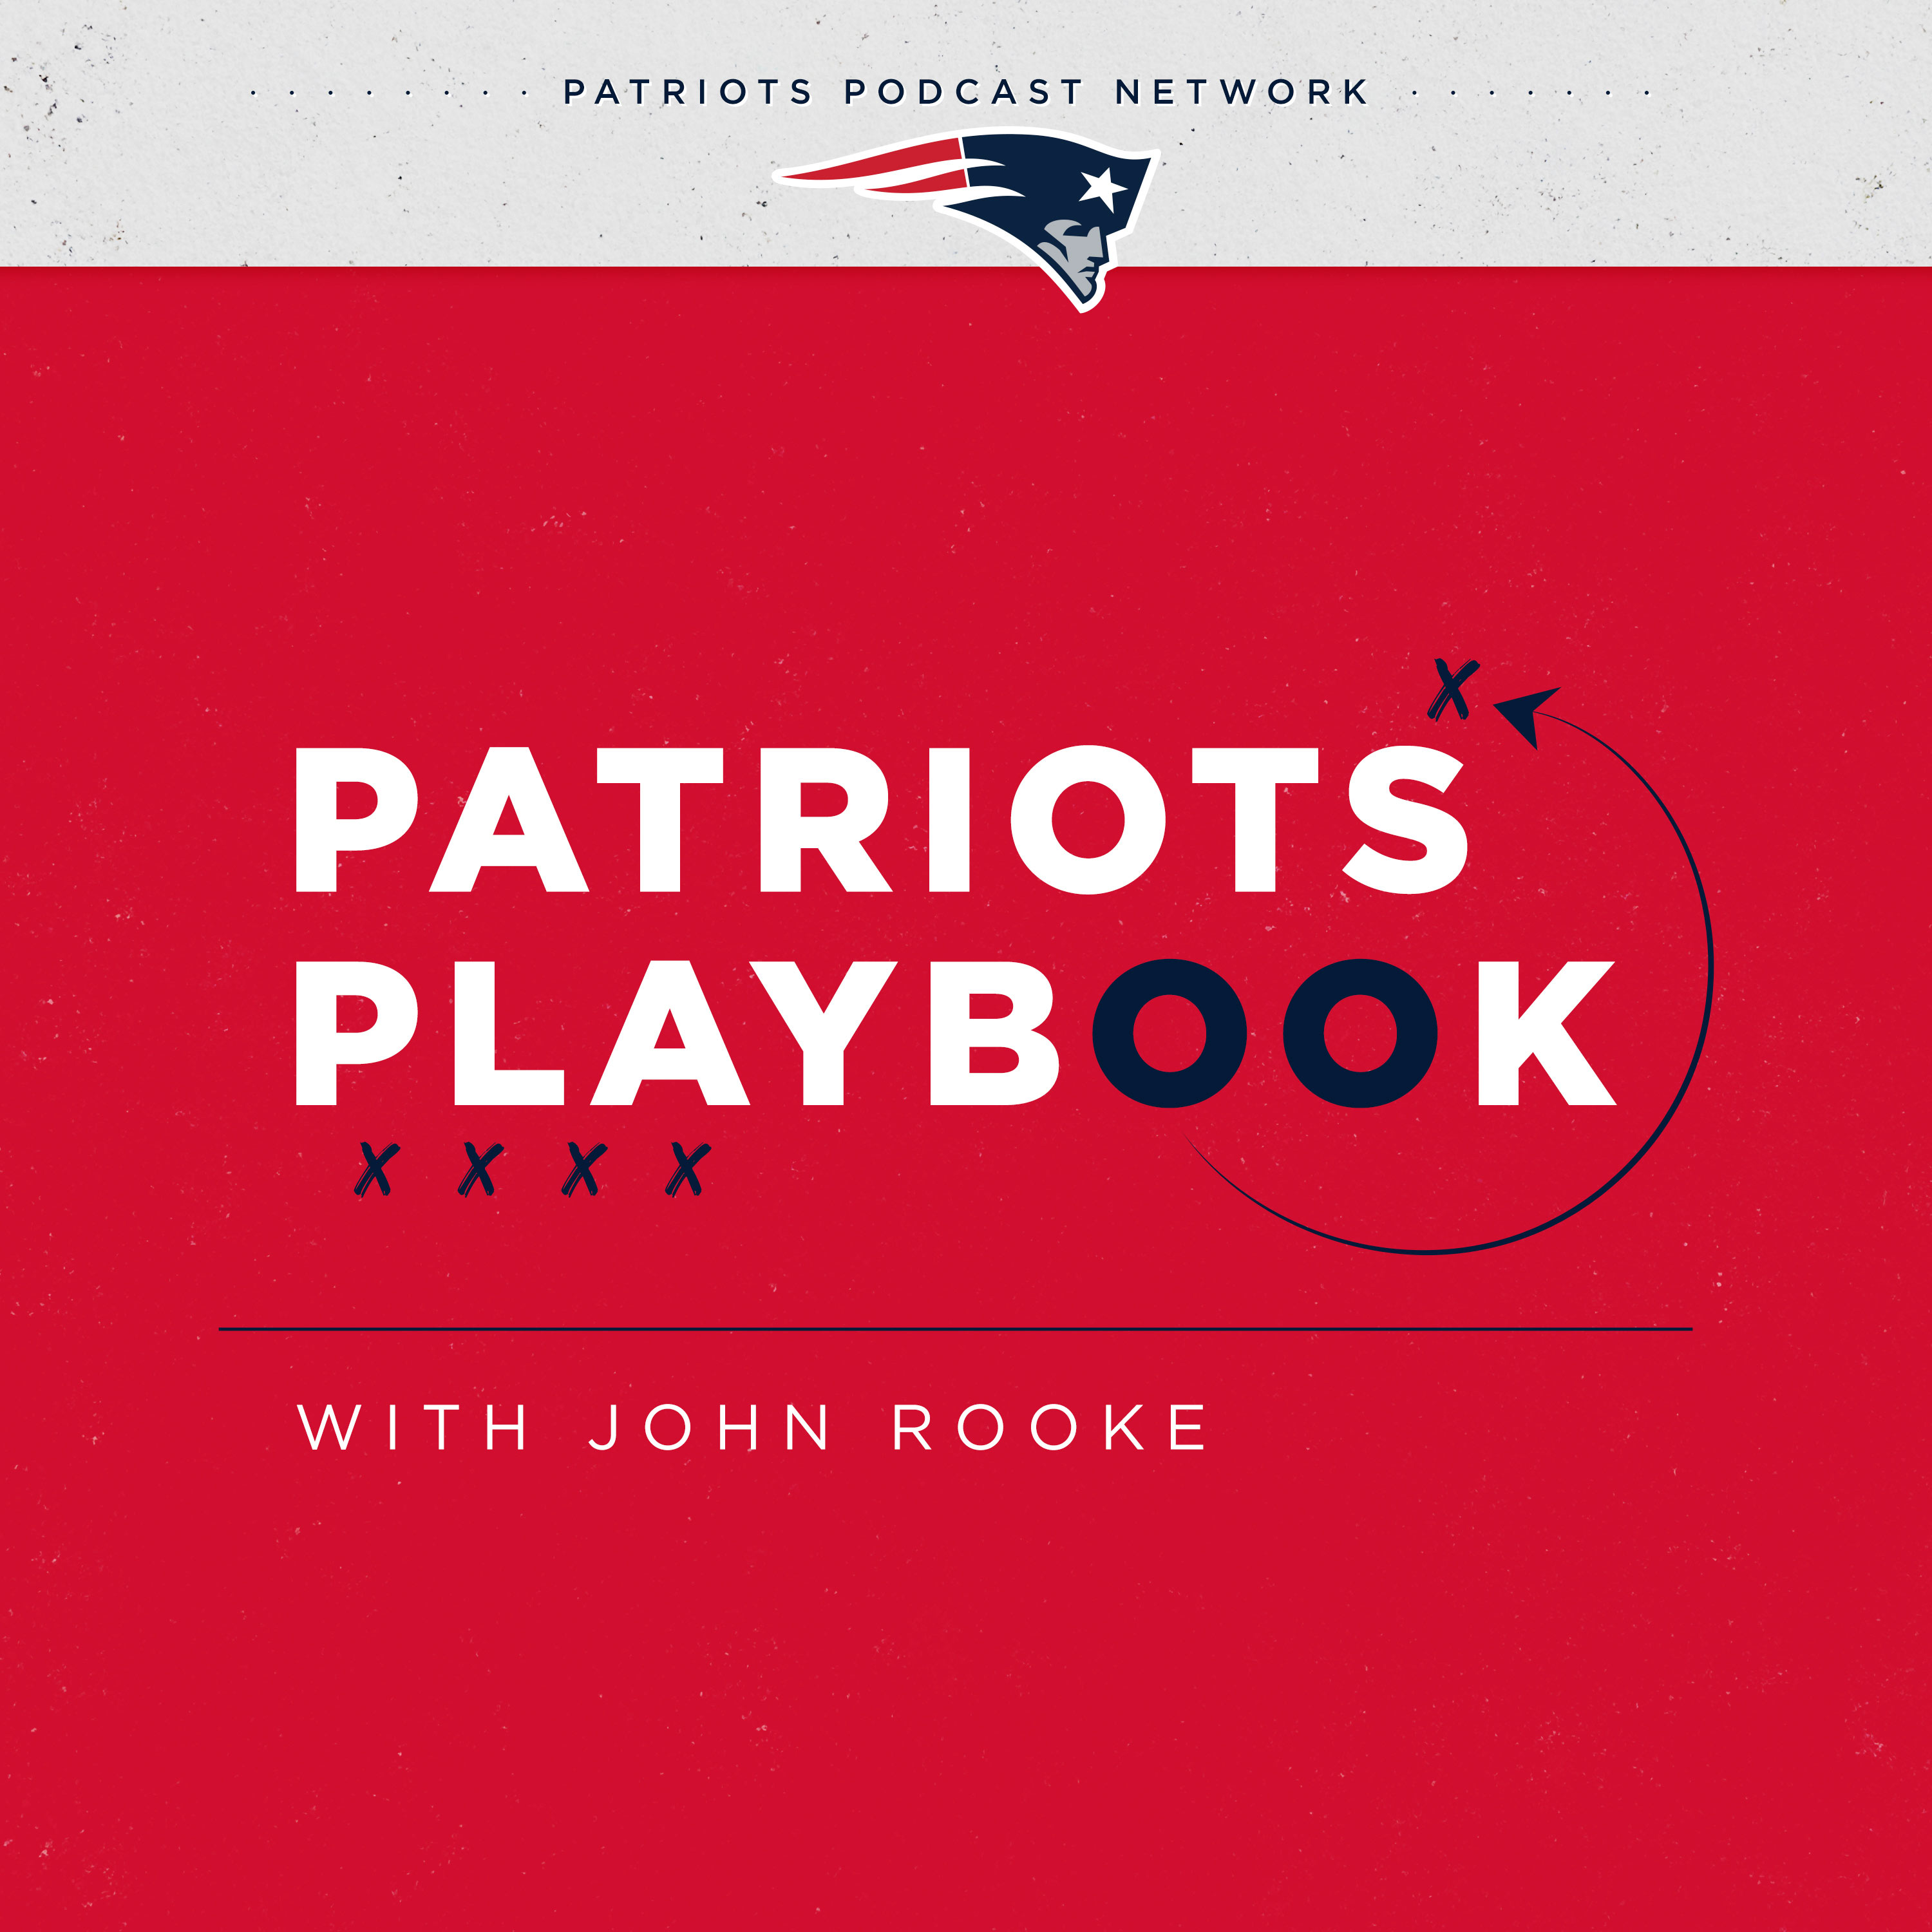 Patriots Playbook: Previewing the Raiders, State of the Patriots, NFL Week 6 Predictions